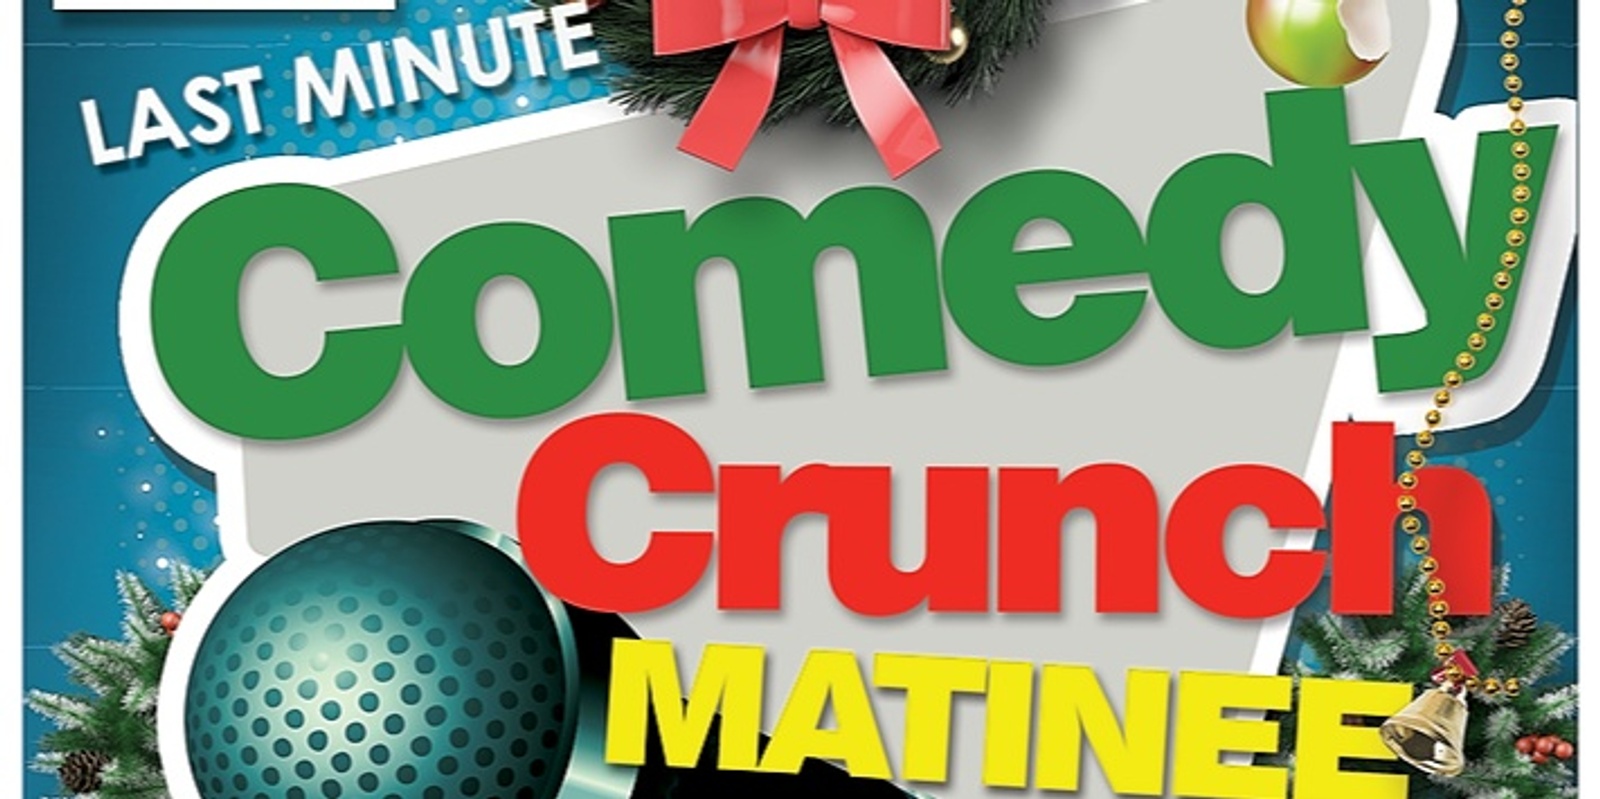 Banner image for Last Minute Comedy Crunch Matinee